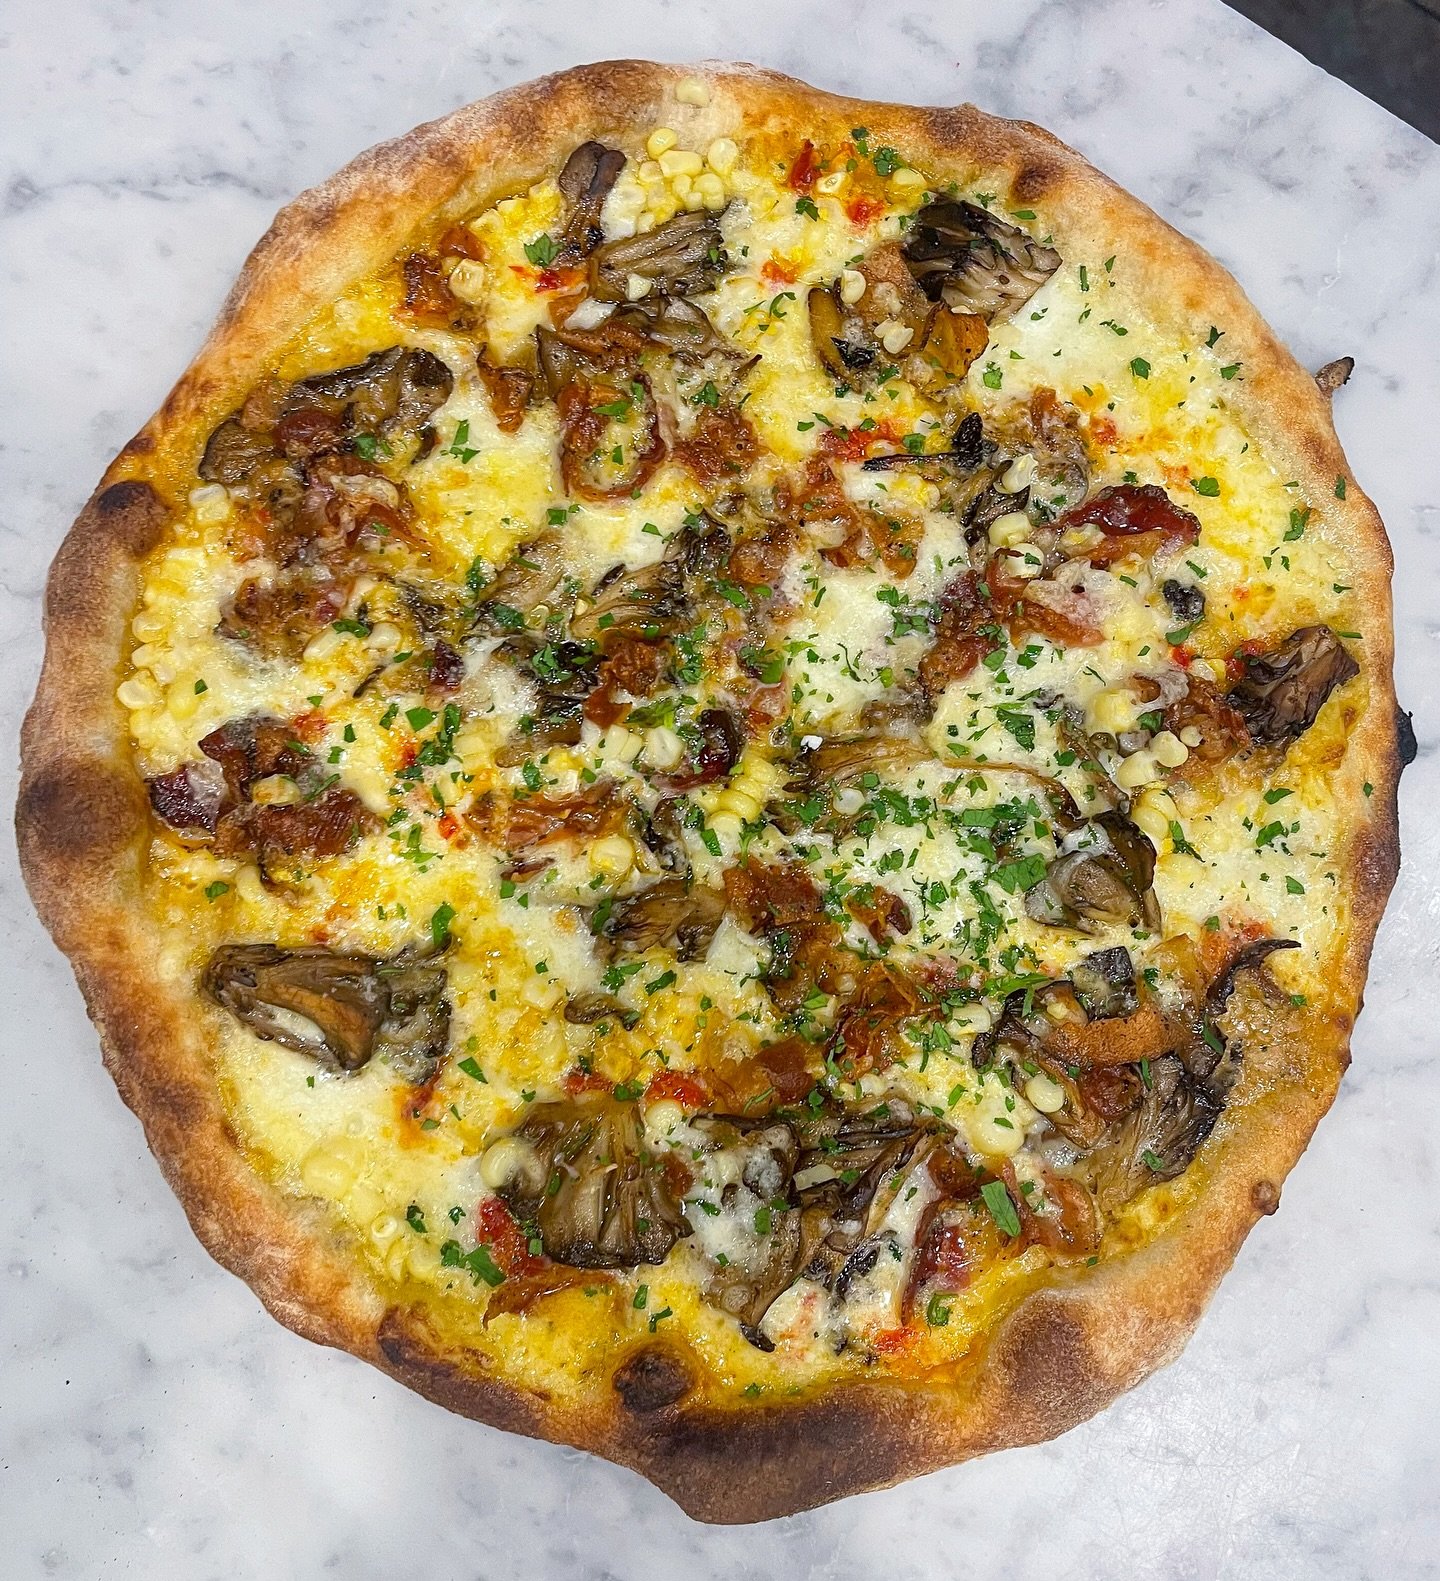 Pizza is always a good idea...right?! 🍕 

Try our May Pizza of the Month, Sunnyside, exclusively in Marin! With a rich corn crema base &amp; mozzarella di bufala and caciocavallo, all topped with earthy hen of the woods mushrooms, savory guanciale, 